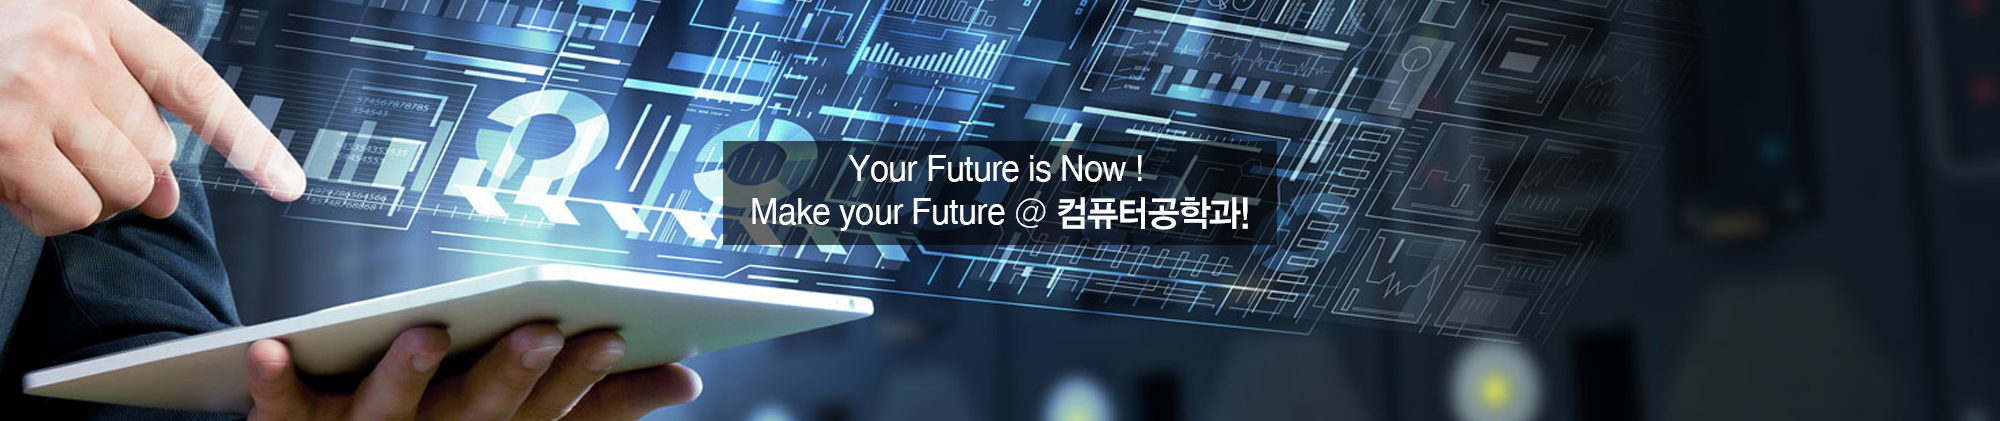 Your Future is Now! Make your Future @ 컴퓨터공학과